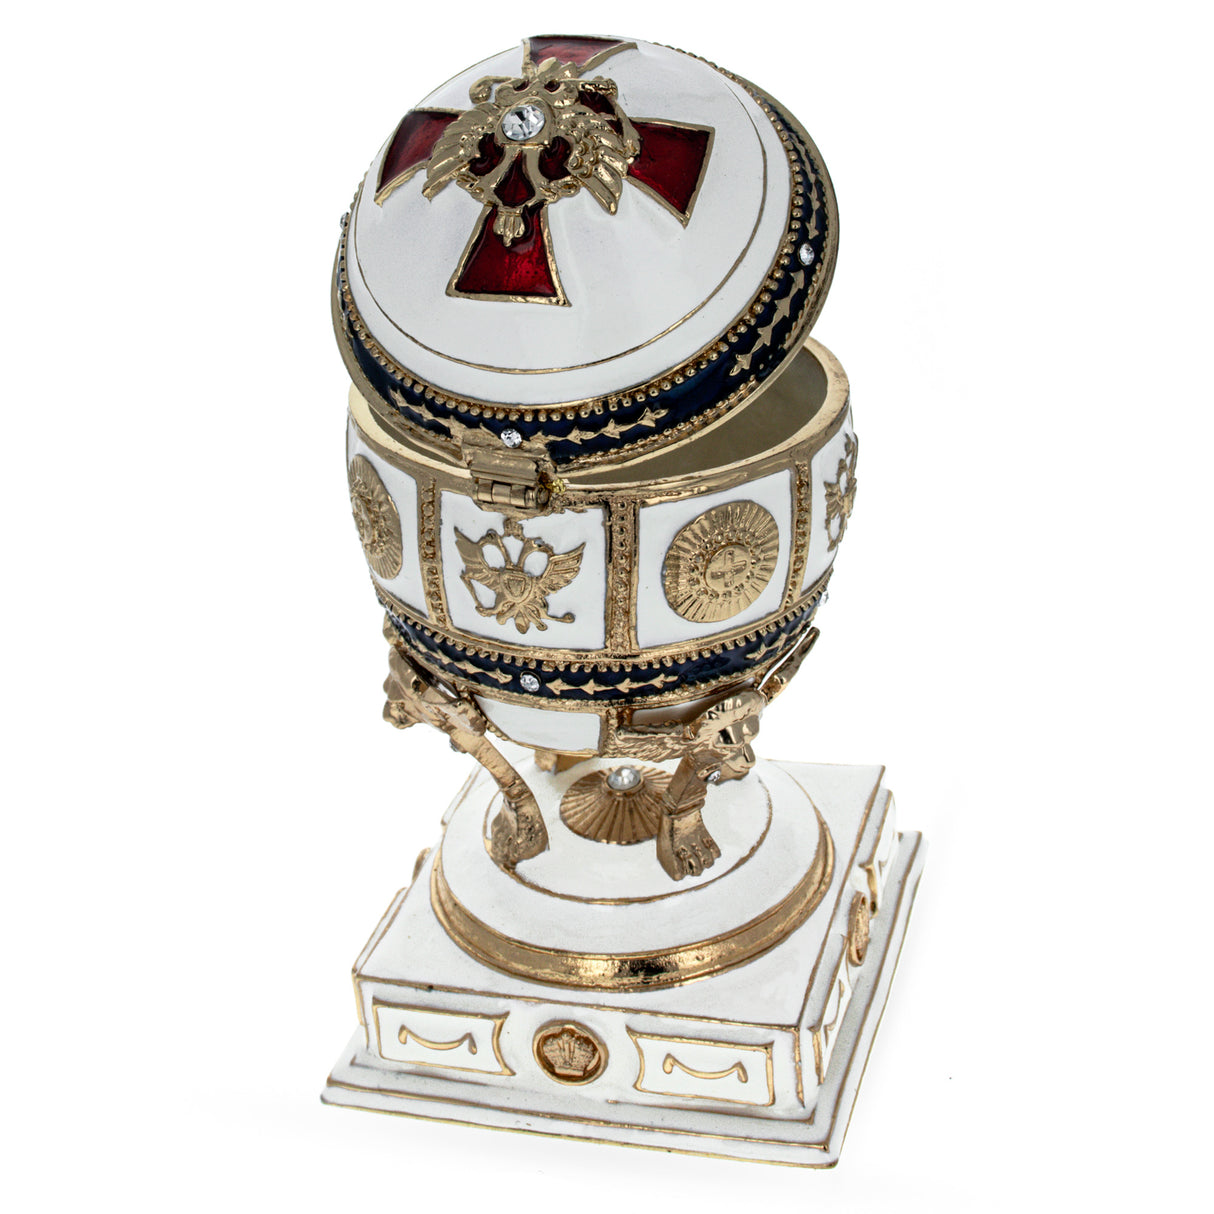 Red Cross on White Enamel Royal Inspired Imperial Easter Egg ,dimensions in inches: 4.5 x 2.6 x 3.6